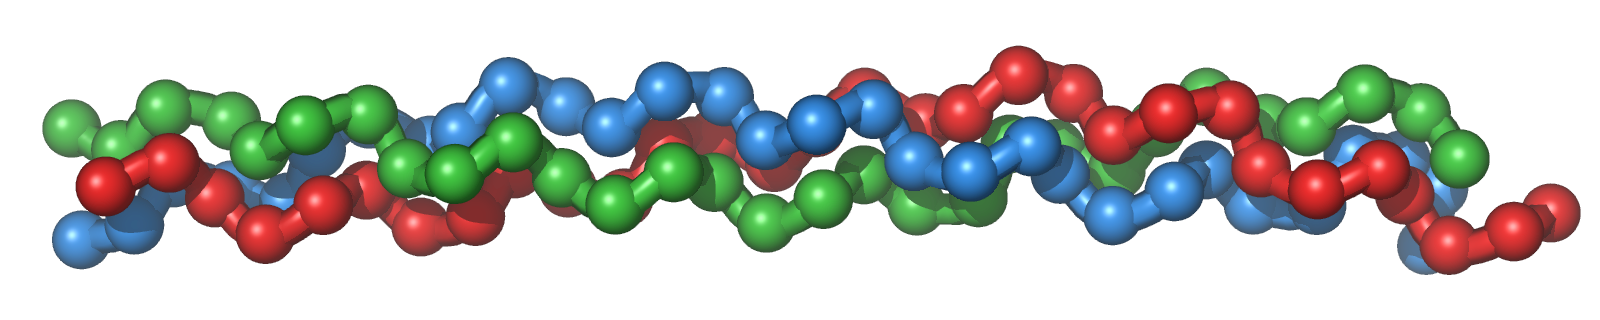 Collagen triple helix as a trimeric protein